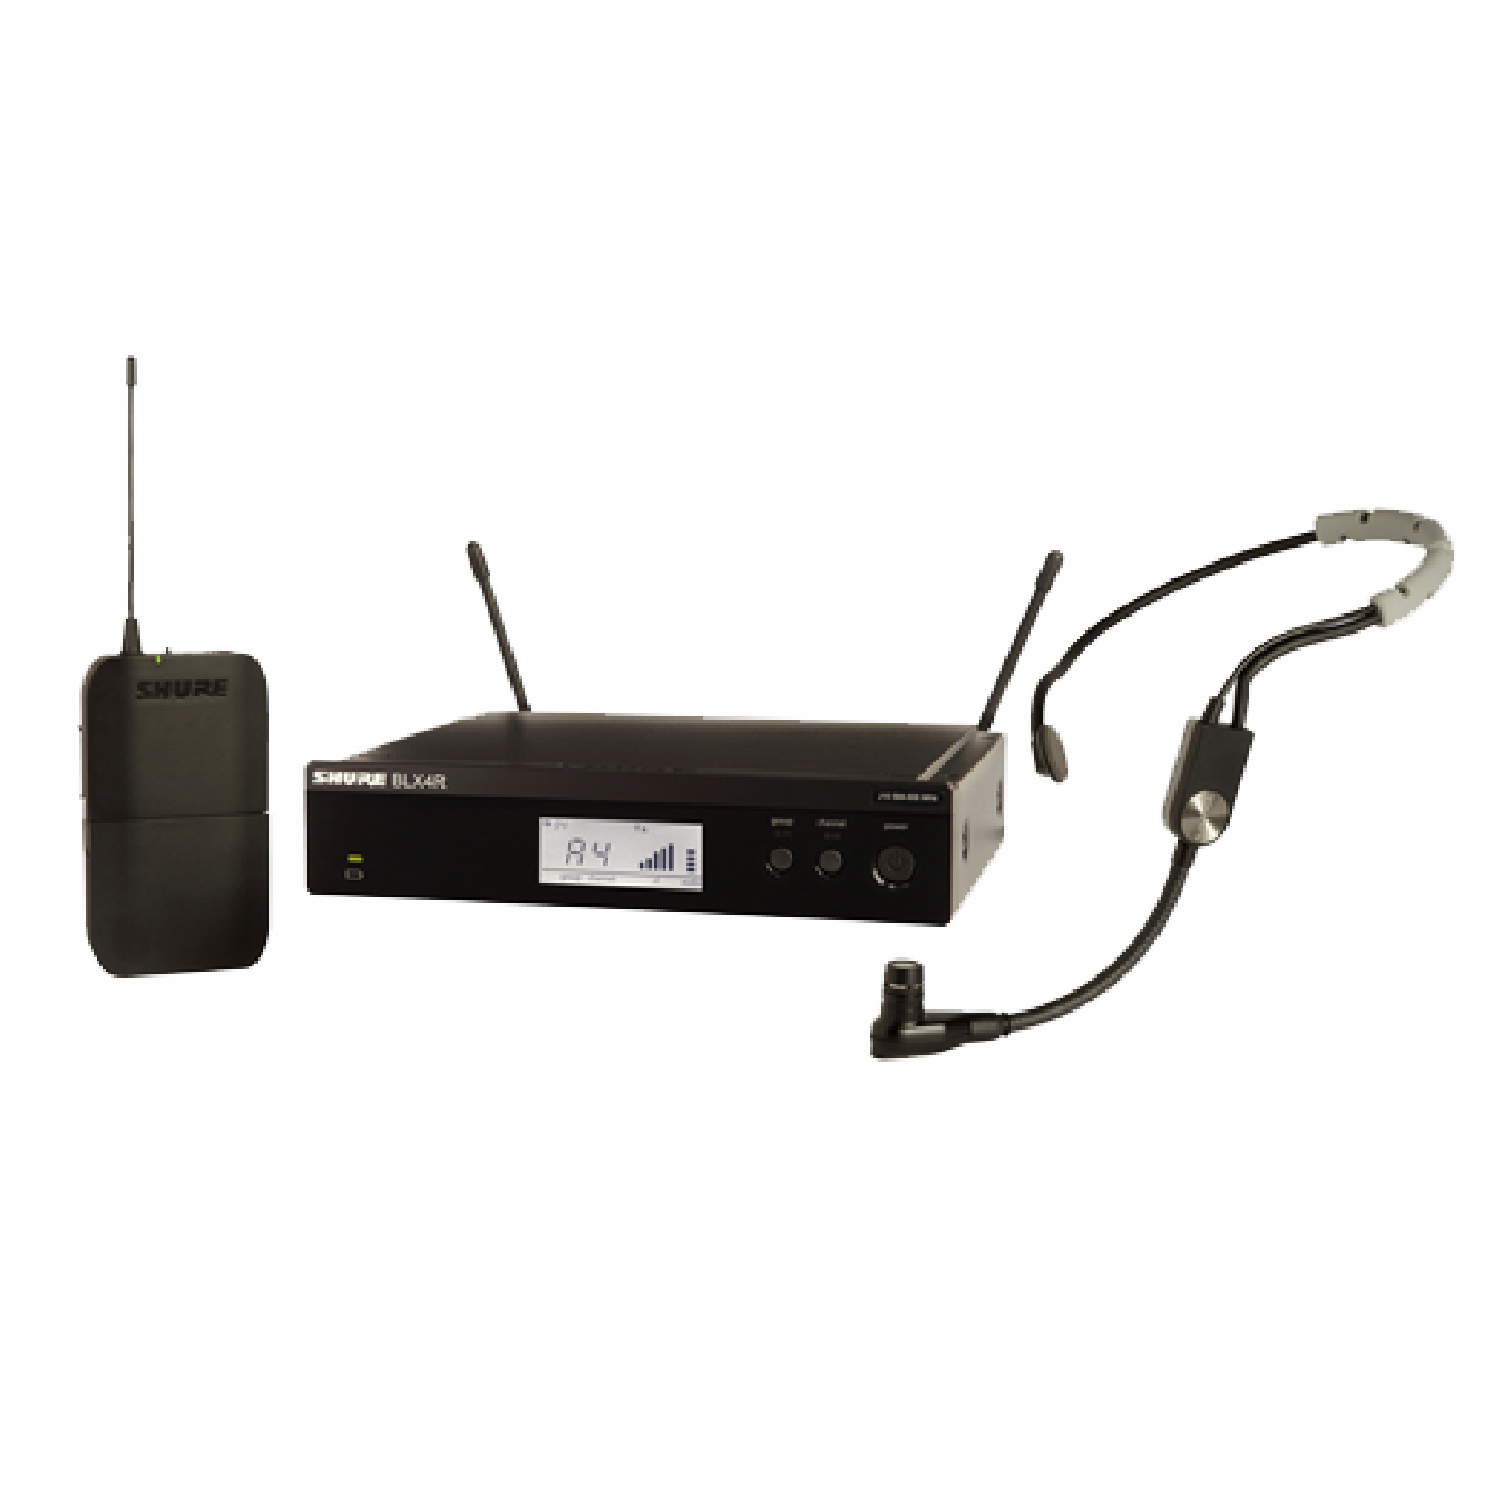 Wireless Rack Mount Headset System with SM35 Headset Microphone   BLX14RA/SM35 shure